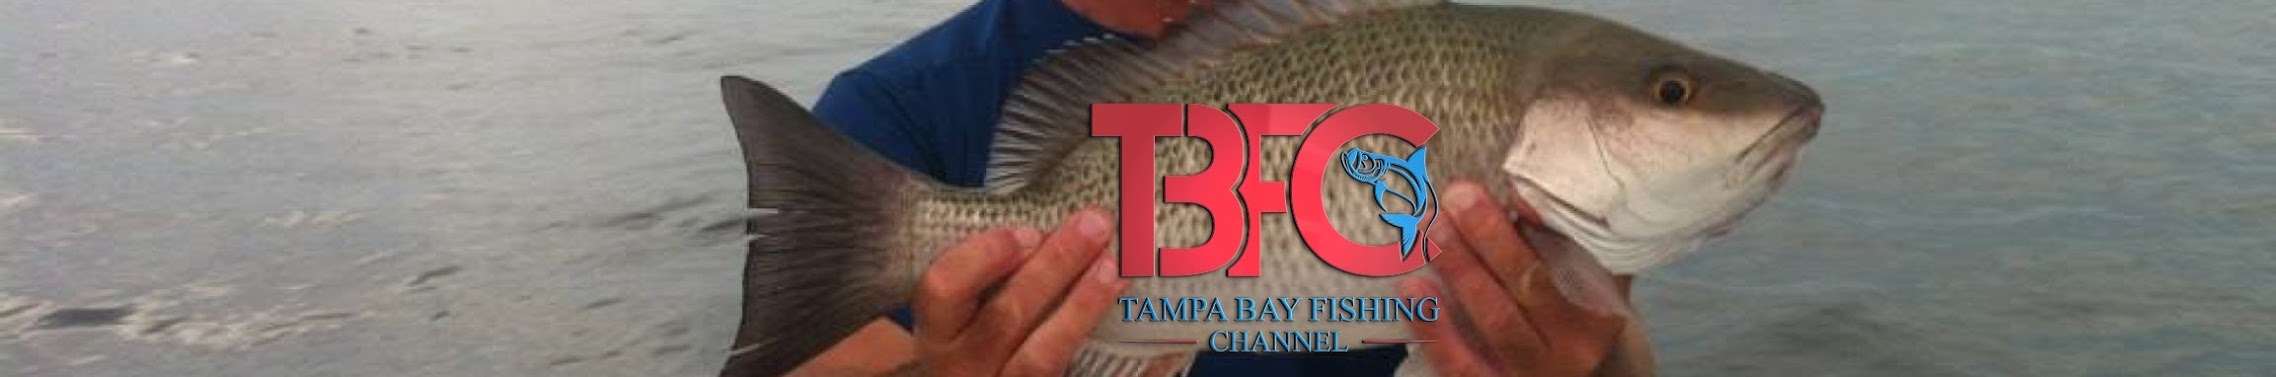 Tampa Bay Fishing Channel 